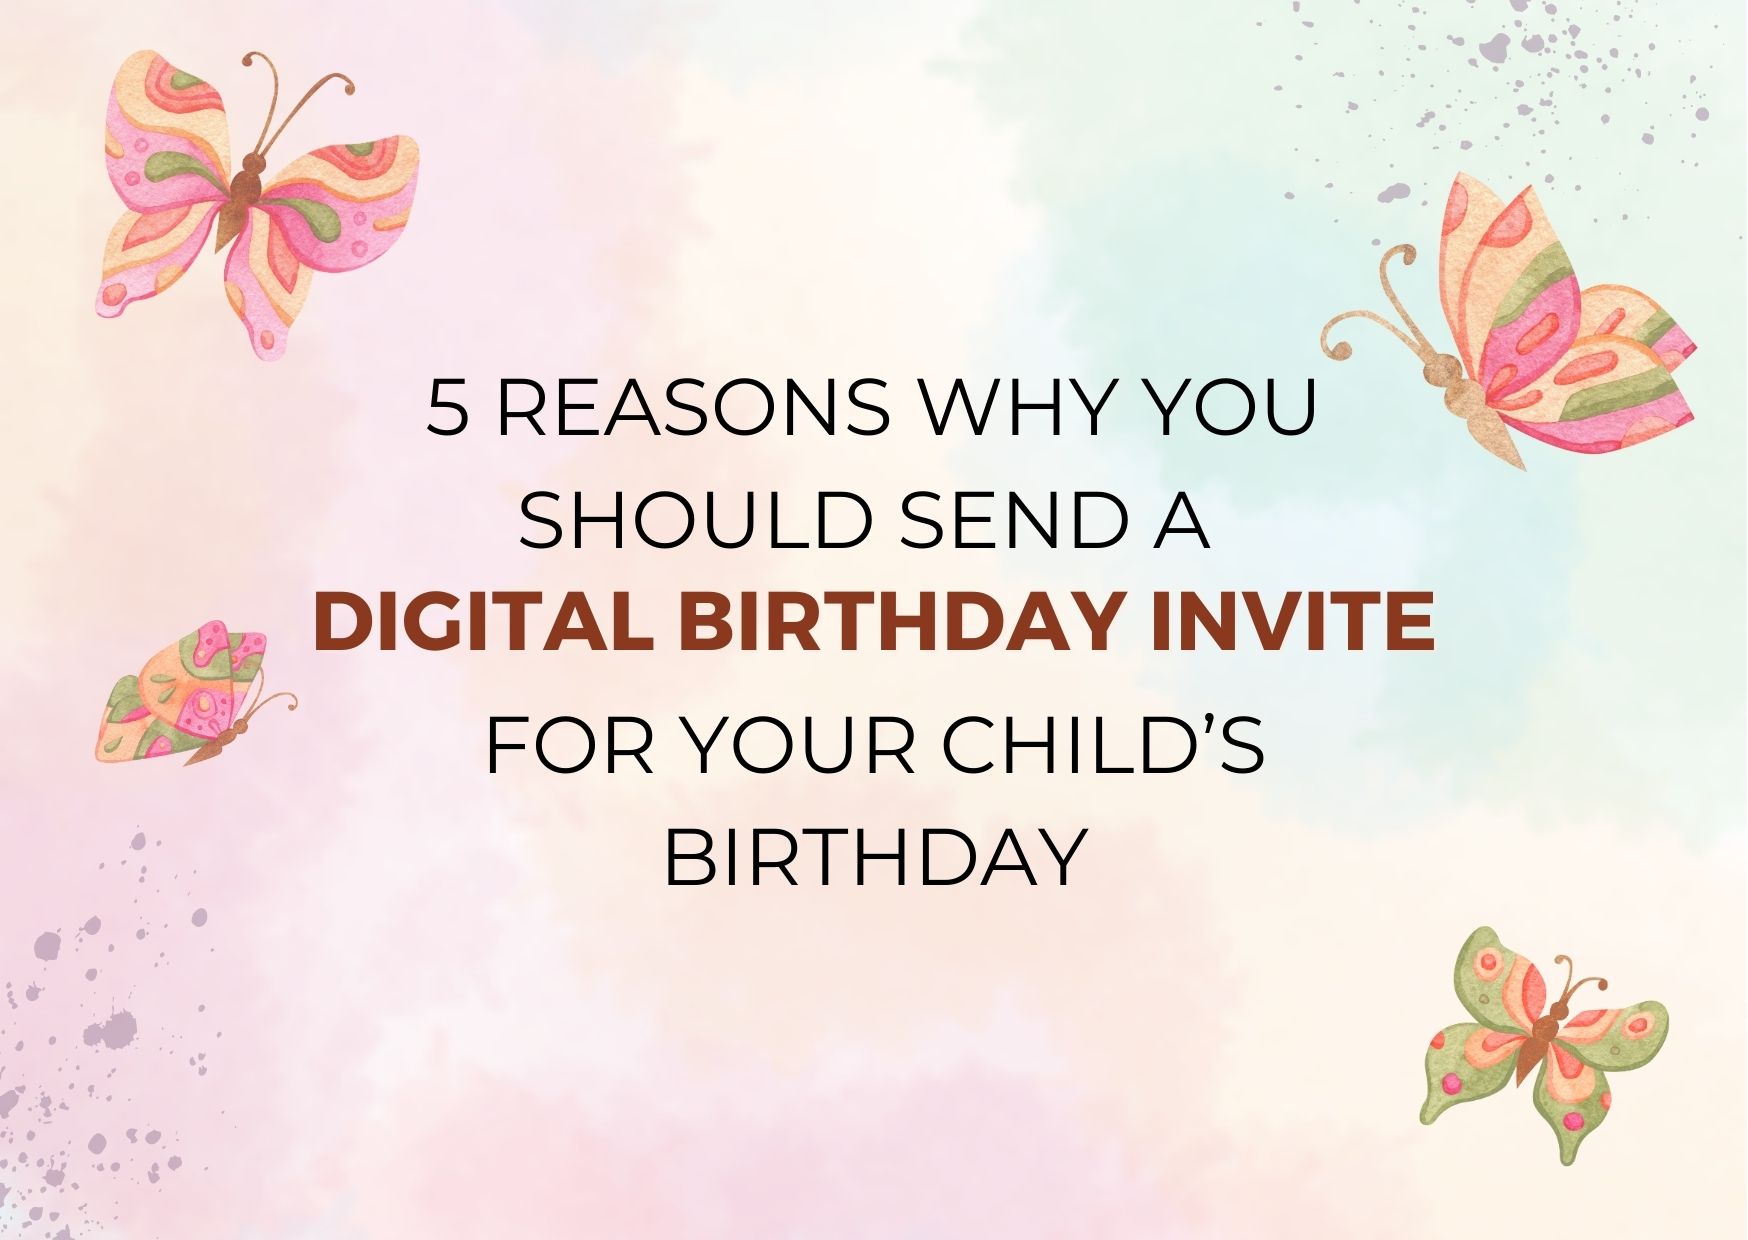 5 Reasons Why You Should Send a Digital Birthday Invite for Your Child’s Birthday